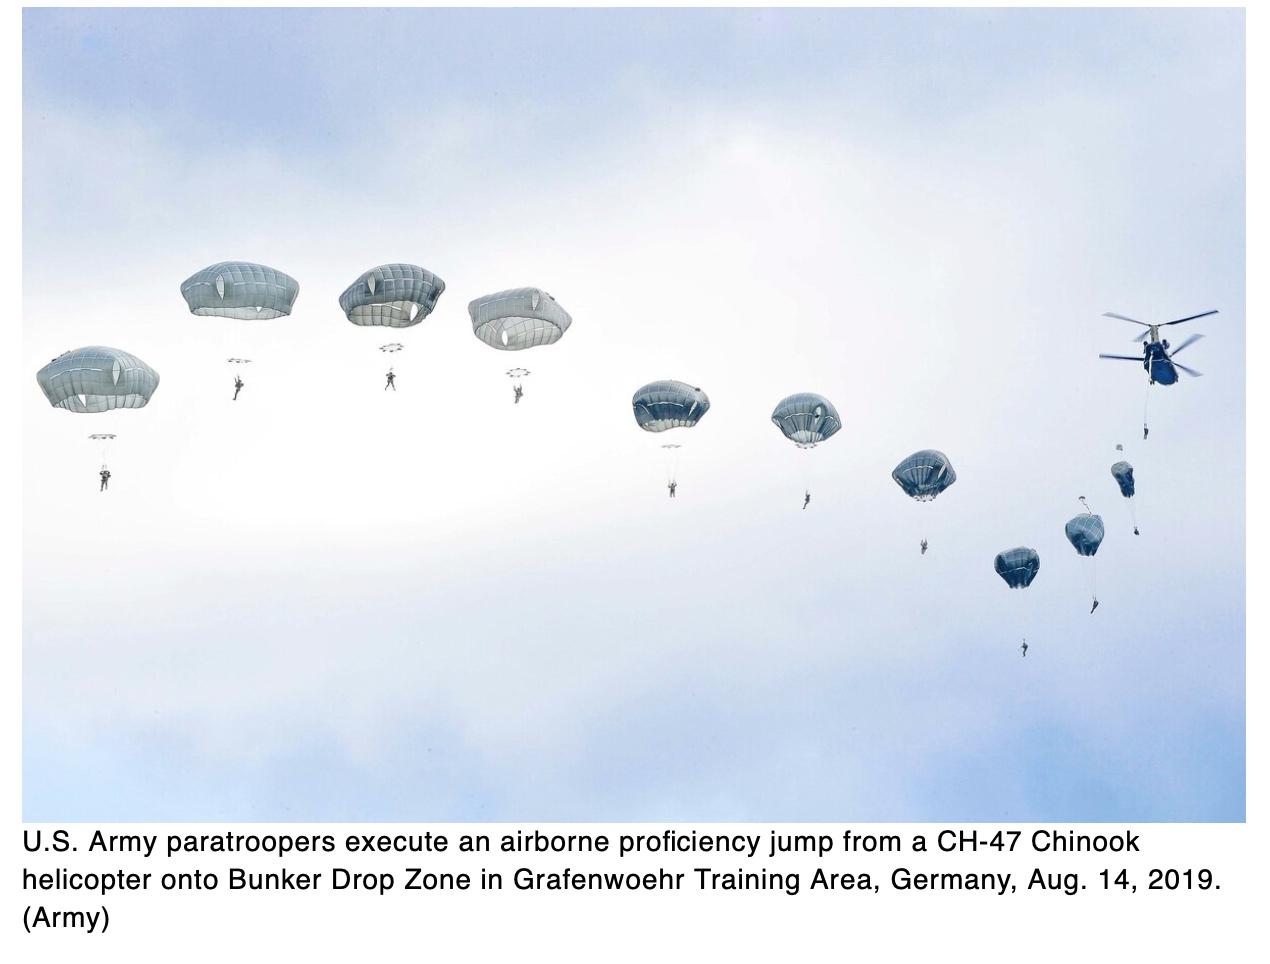  US paratroopers injured in Germany training accident